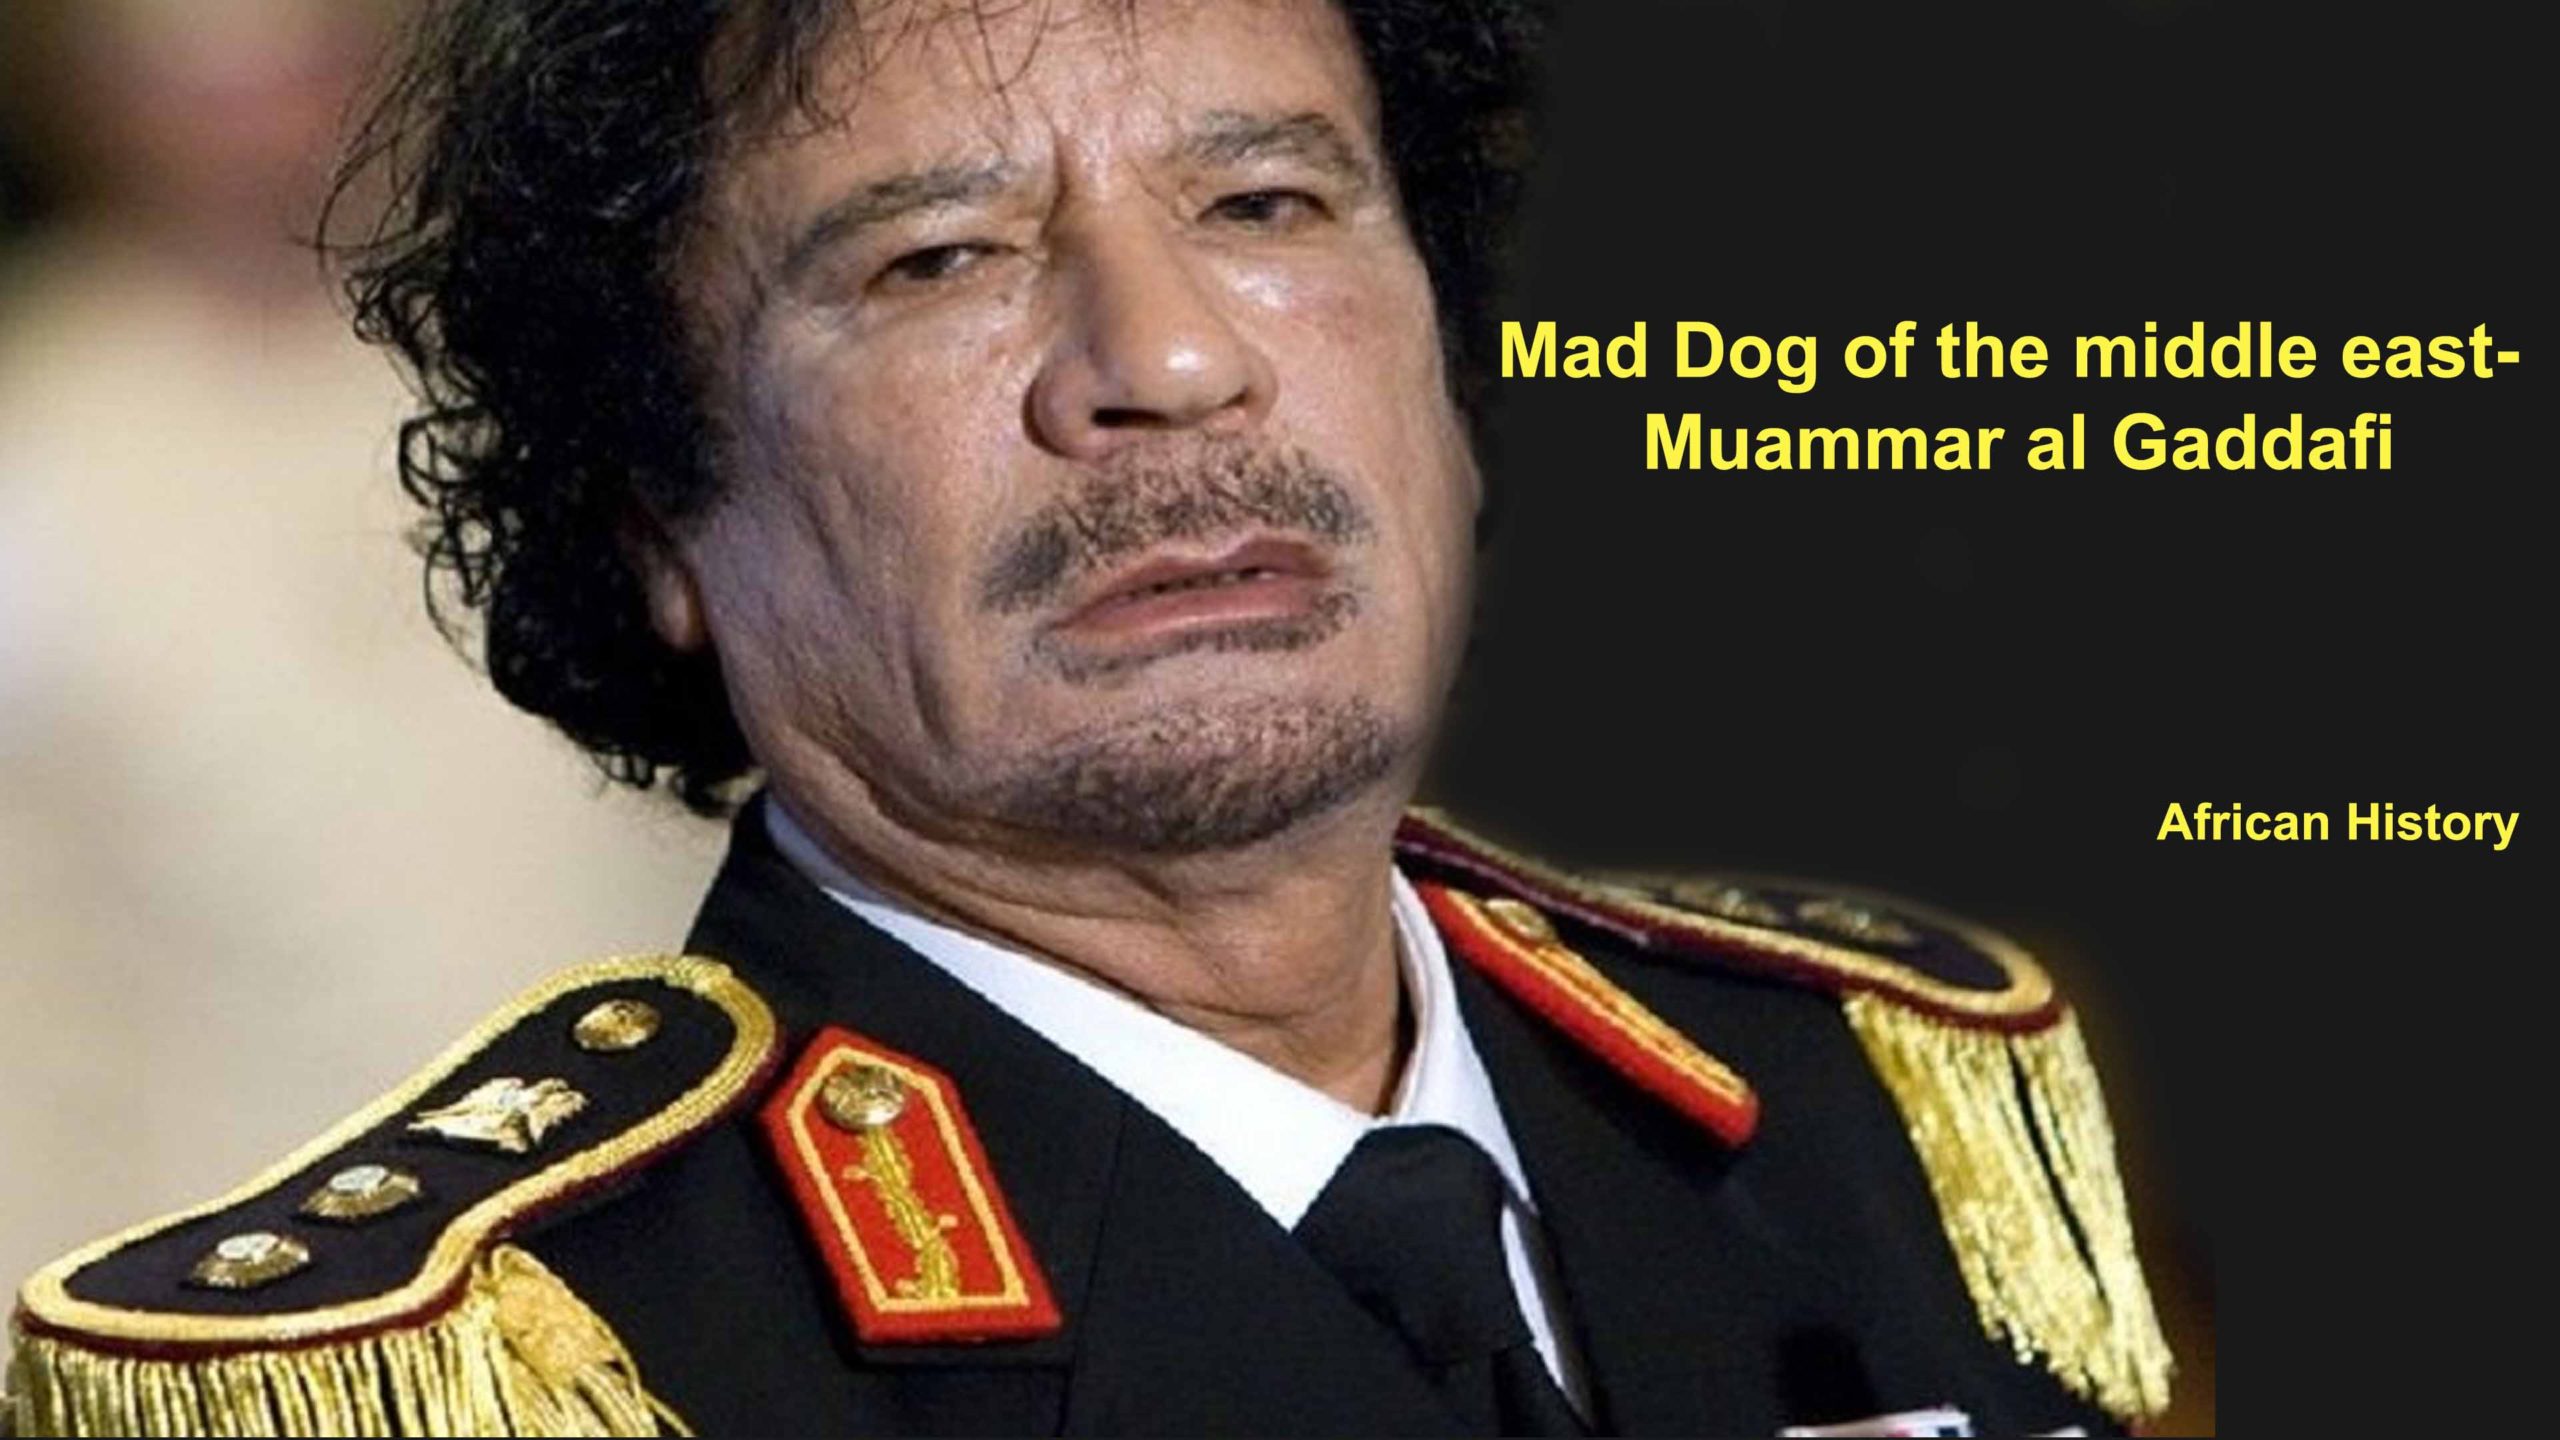 African History: Mad Dog of the middle east- Muammar al Gaddafi AdvertAfrica News on afronewswire.com: Amplifying Africa's Voice | afronewswire.com | Breaking News & Stories